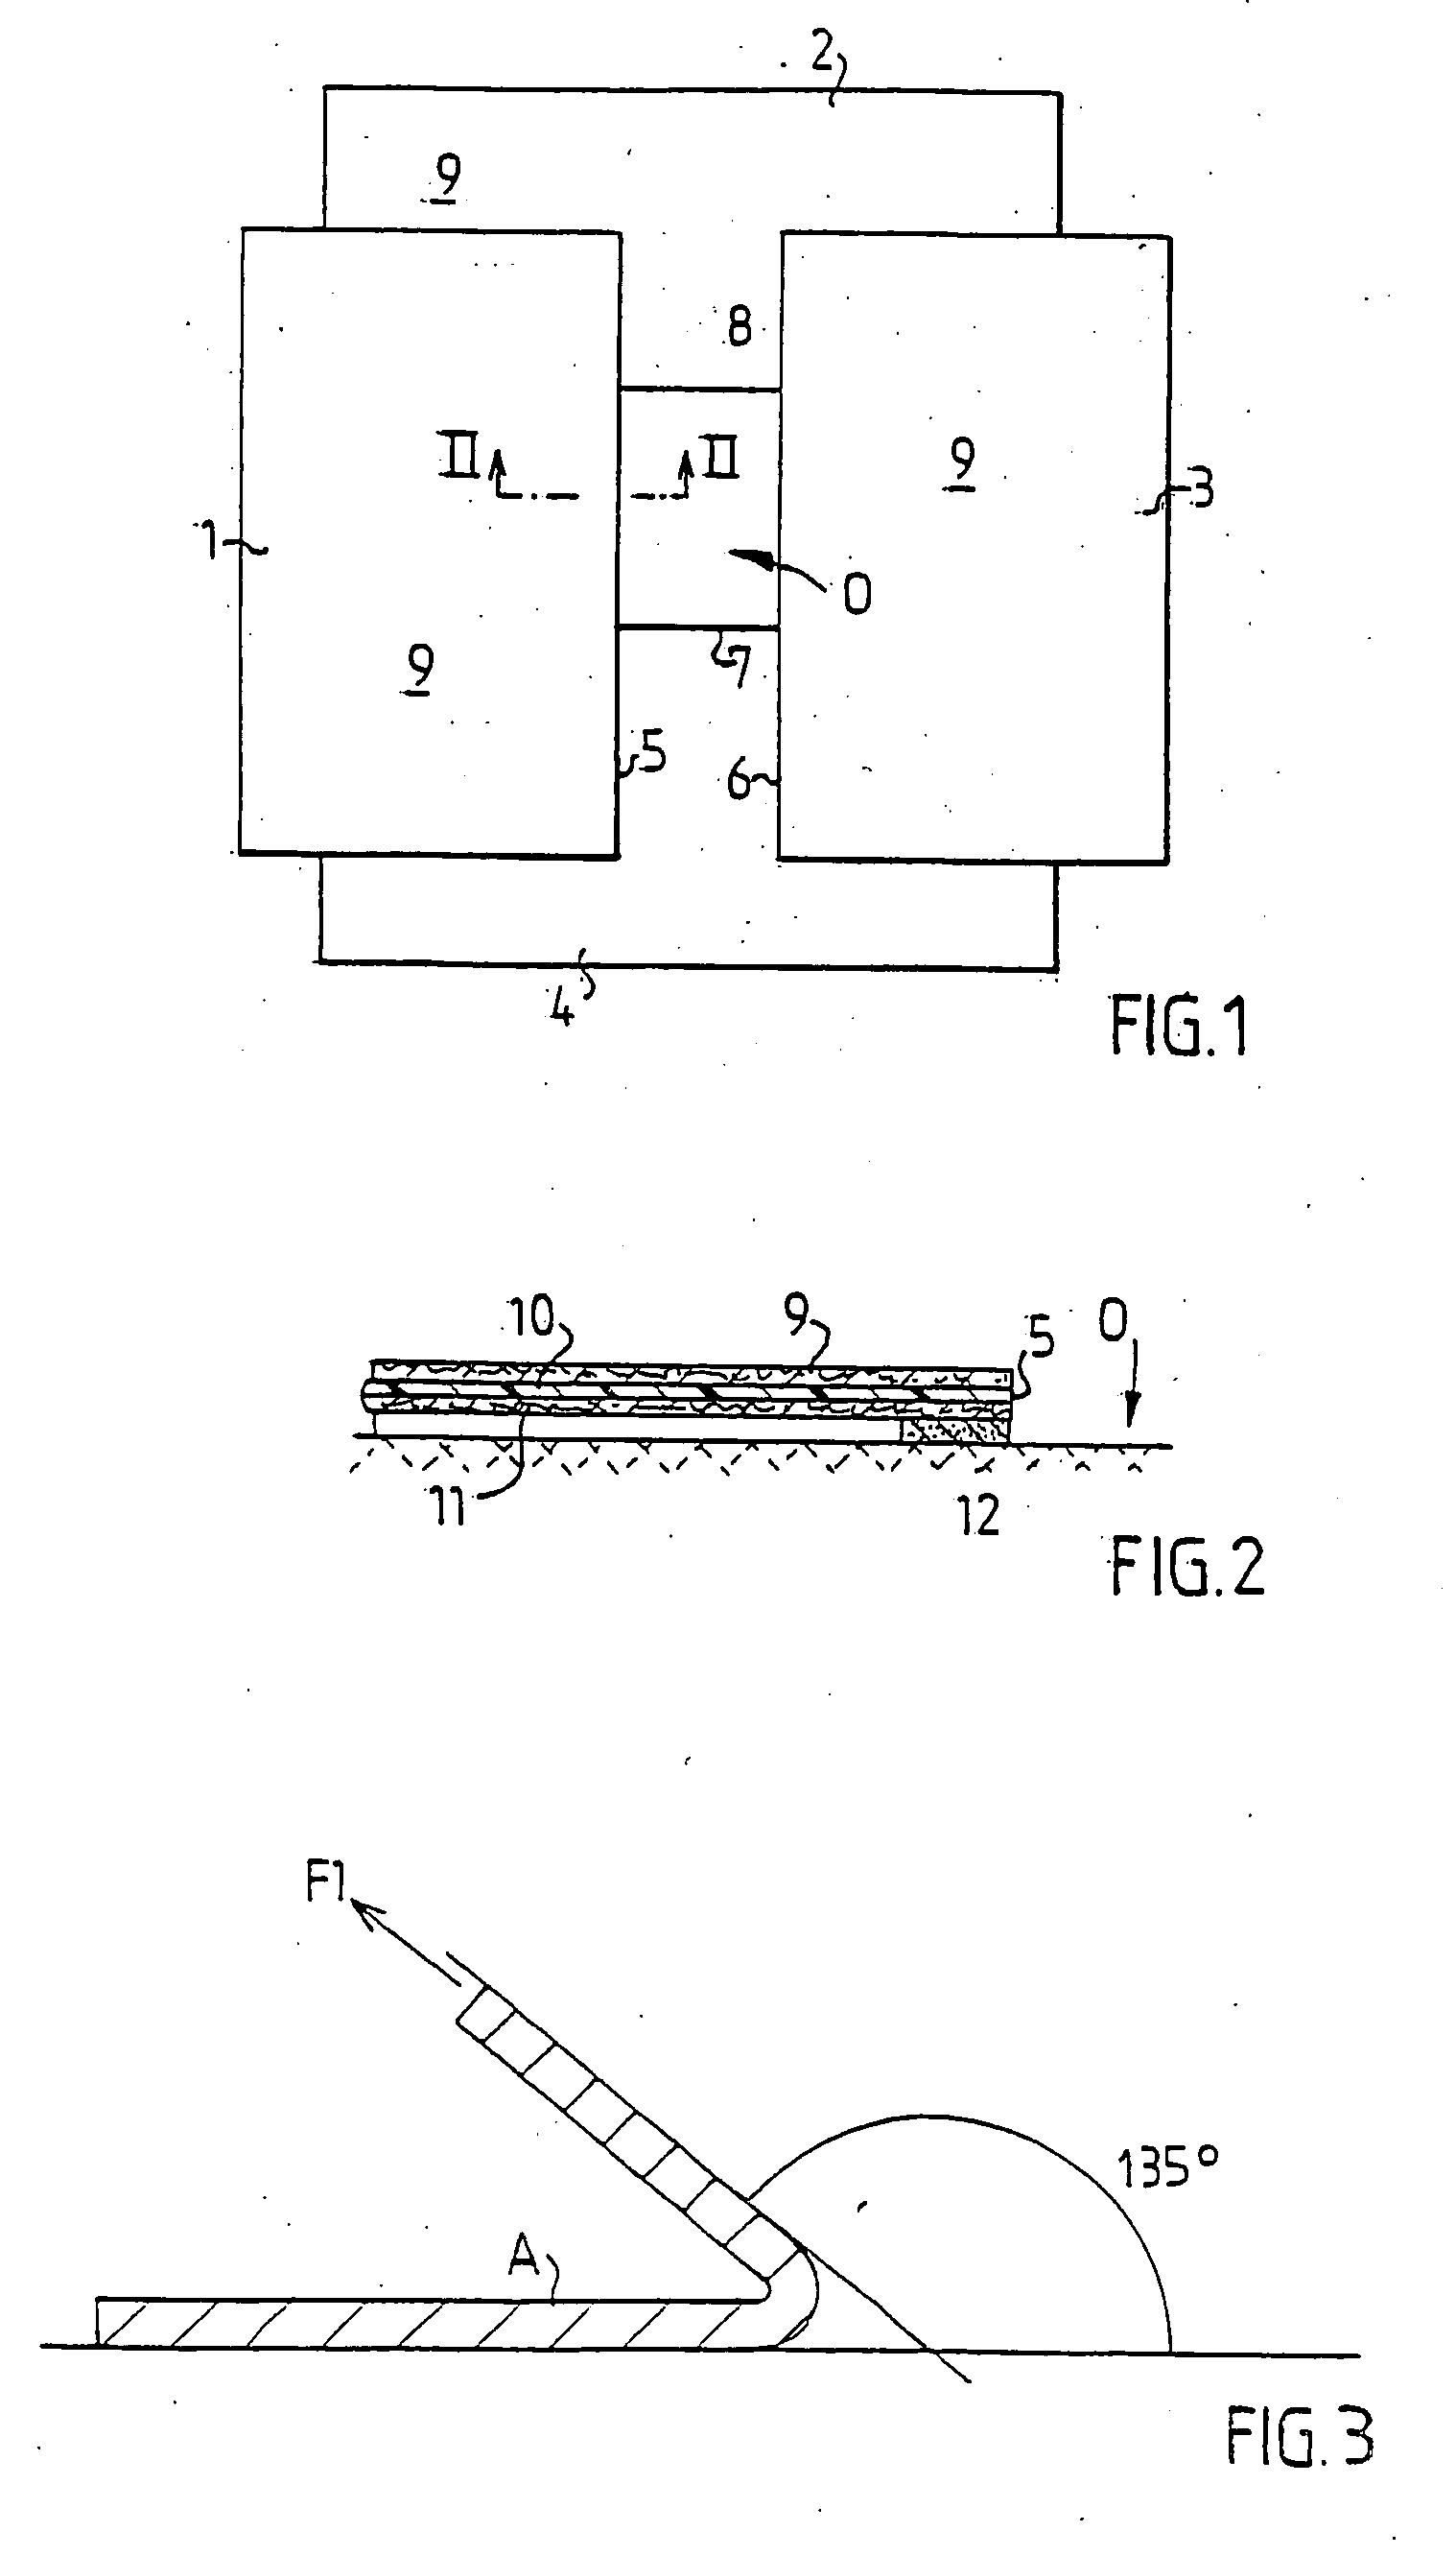 Draping product having an adhesive edge for surgical interventions